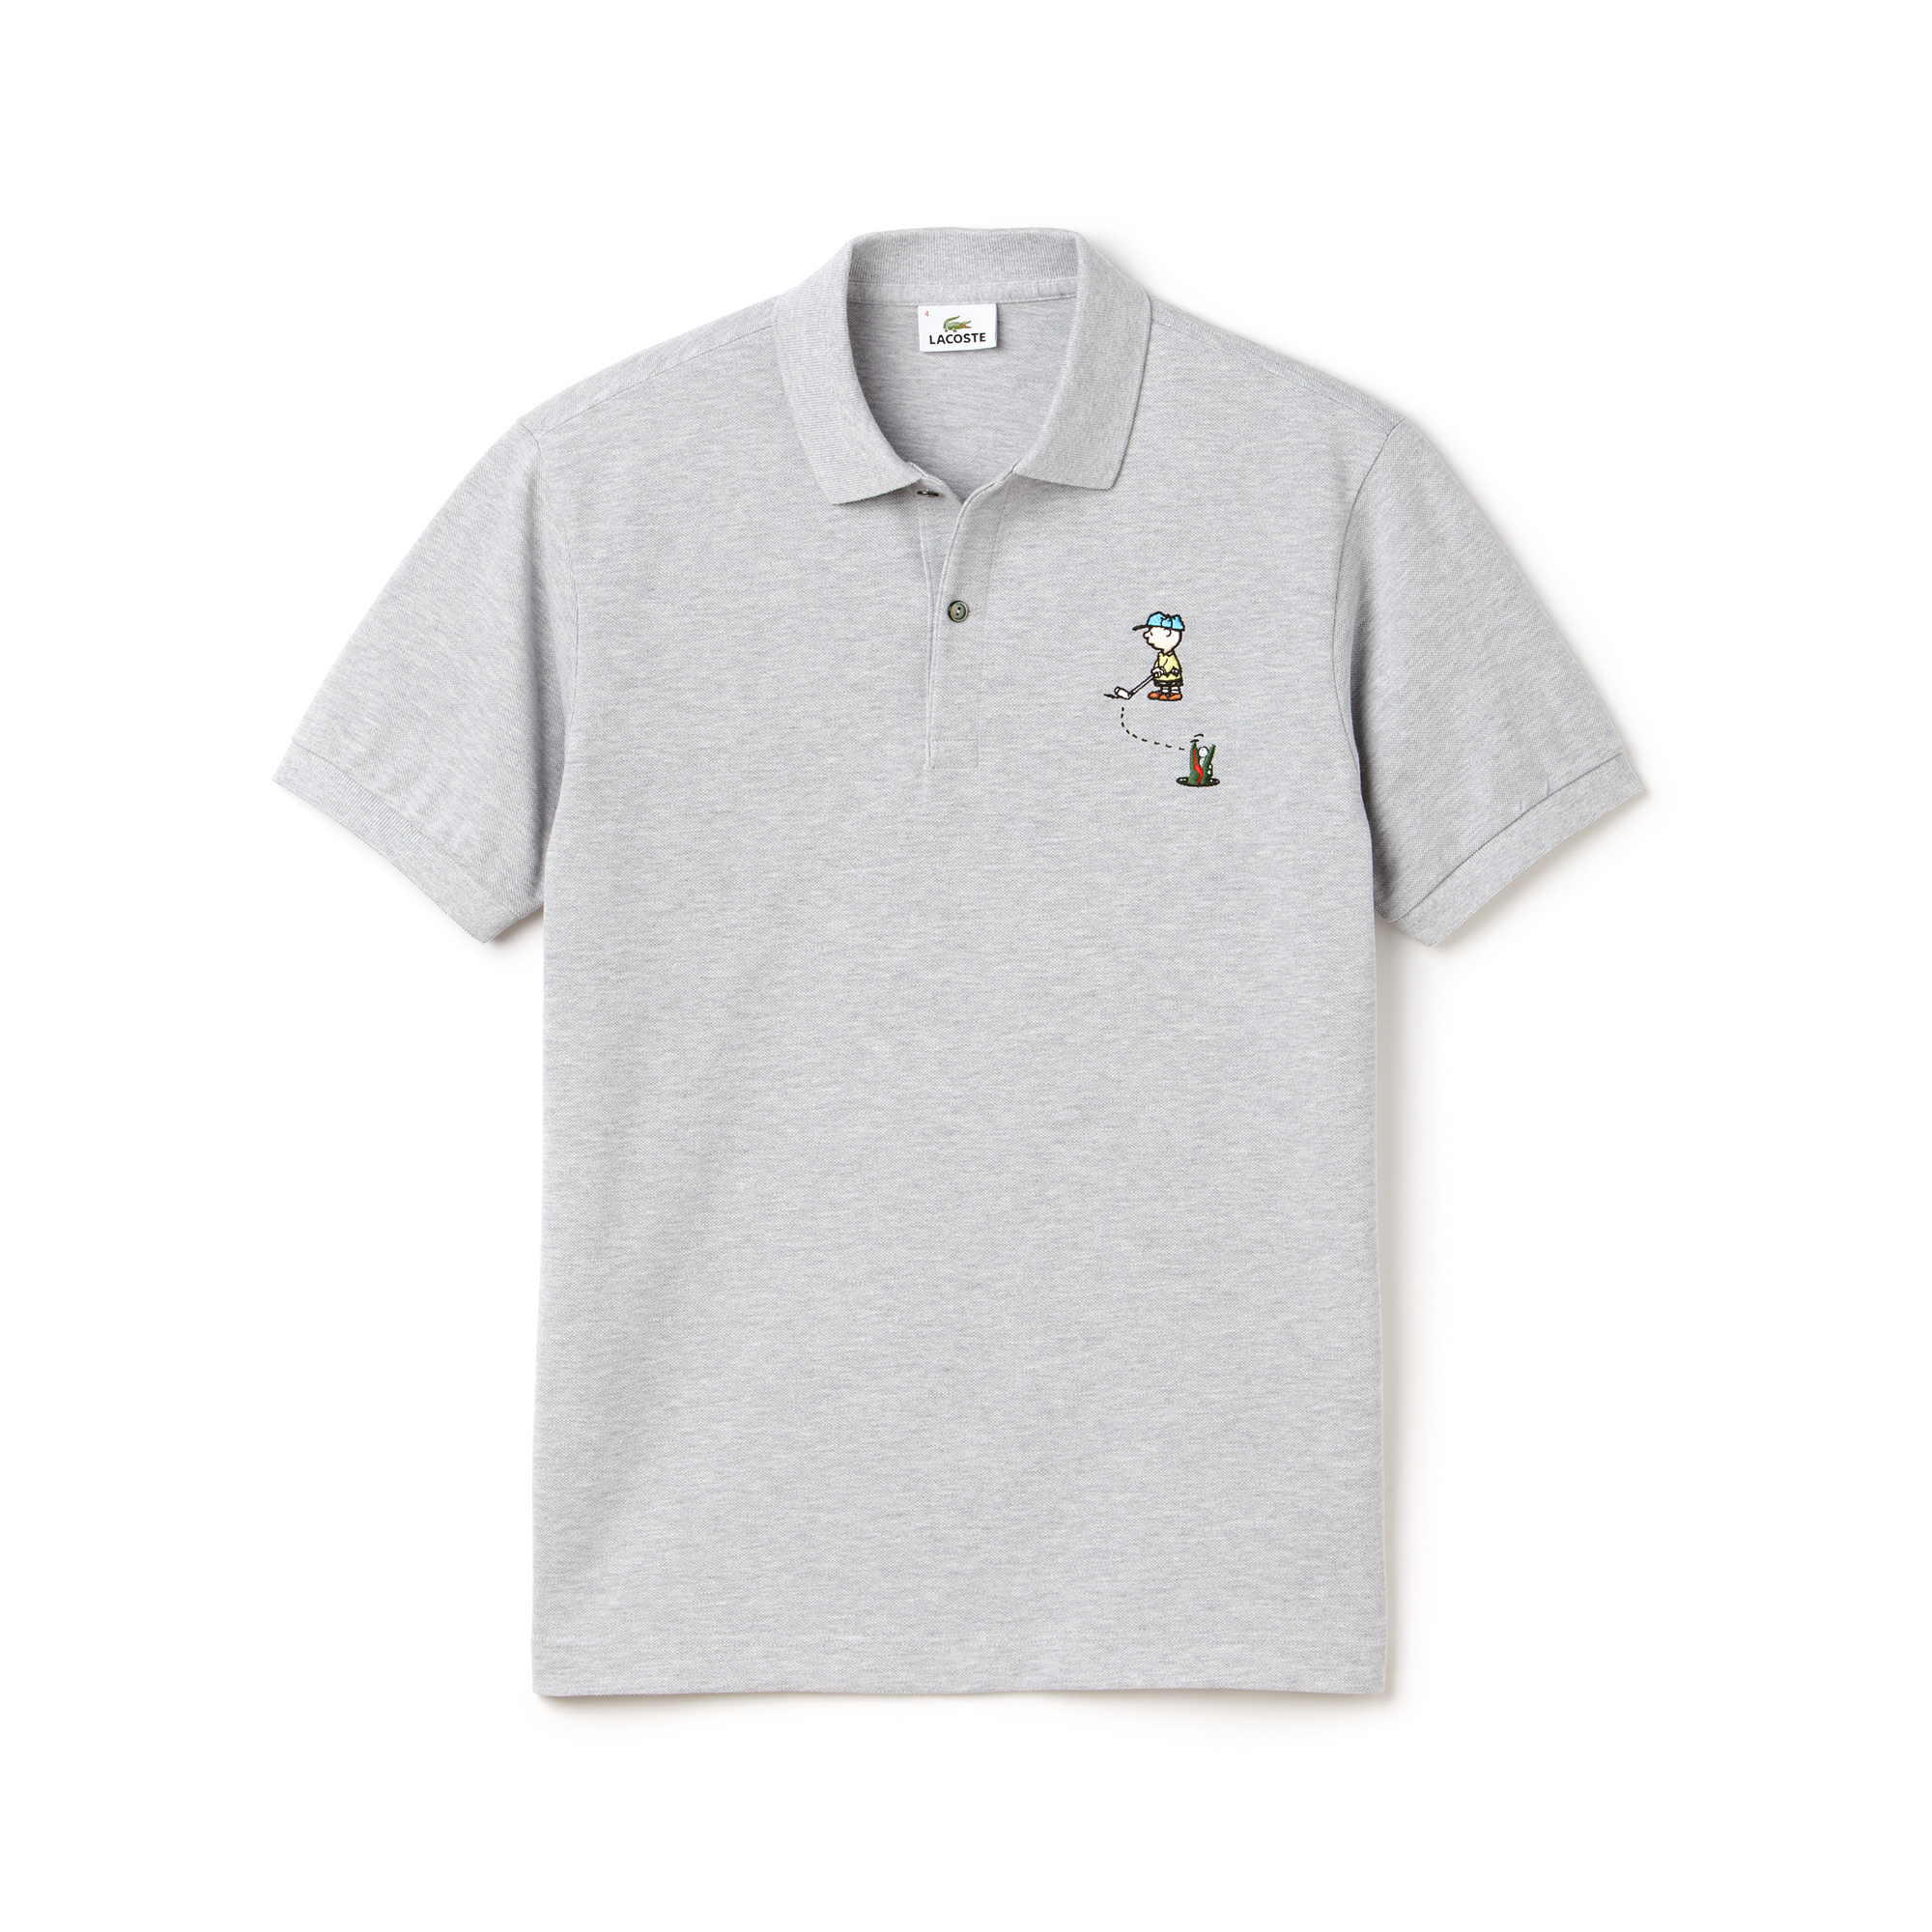 Lacoste collaborate with Snoopy and Charlie Brown - Magazine